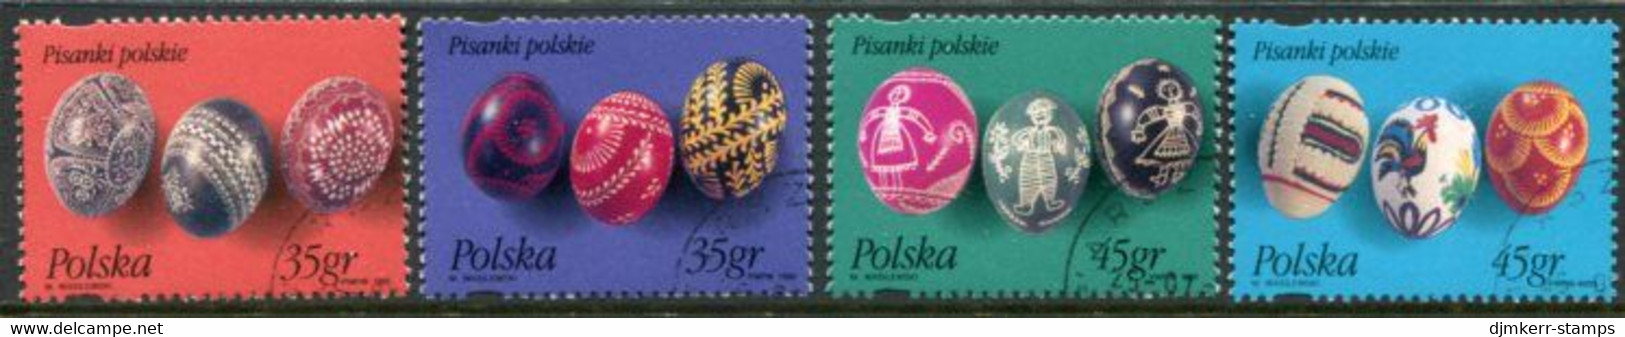 POLAND 1995 Decorated Easter Eggs Used.  Michel 3526-29 - Oblitérés